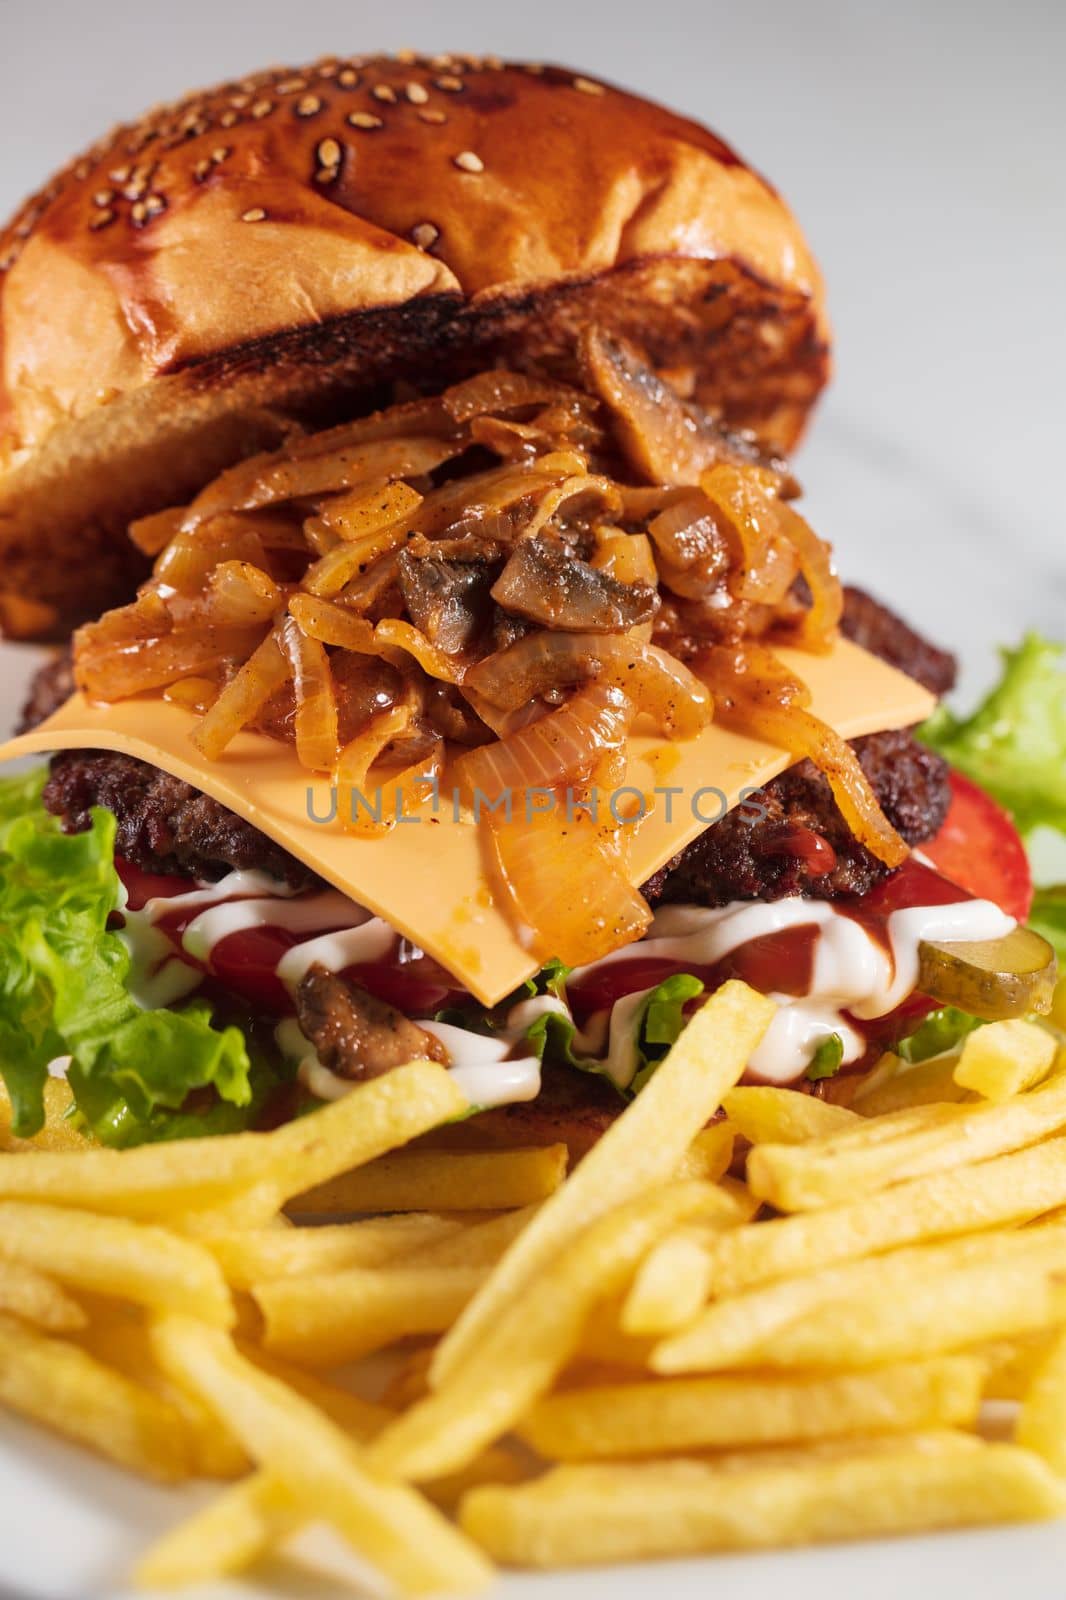 cheeseburger and fries on plate served at restaurant by senkaya